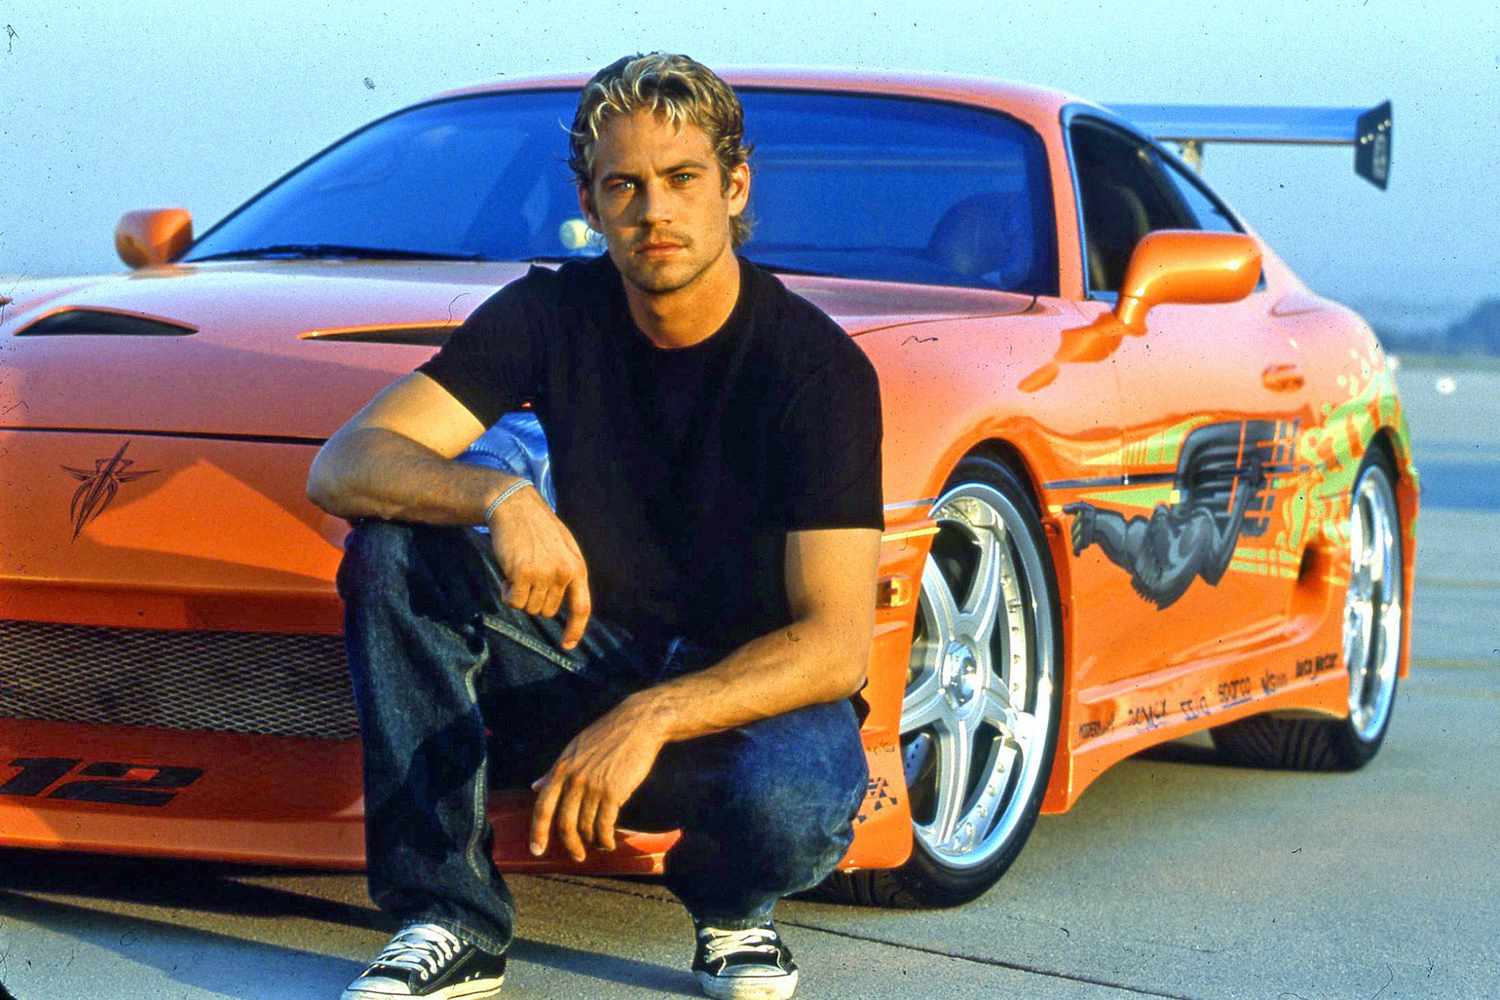 methaan premie Vertrouwen Paul Walker's 'The Fast and the Furious' car is being auctioned off | EW.com